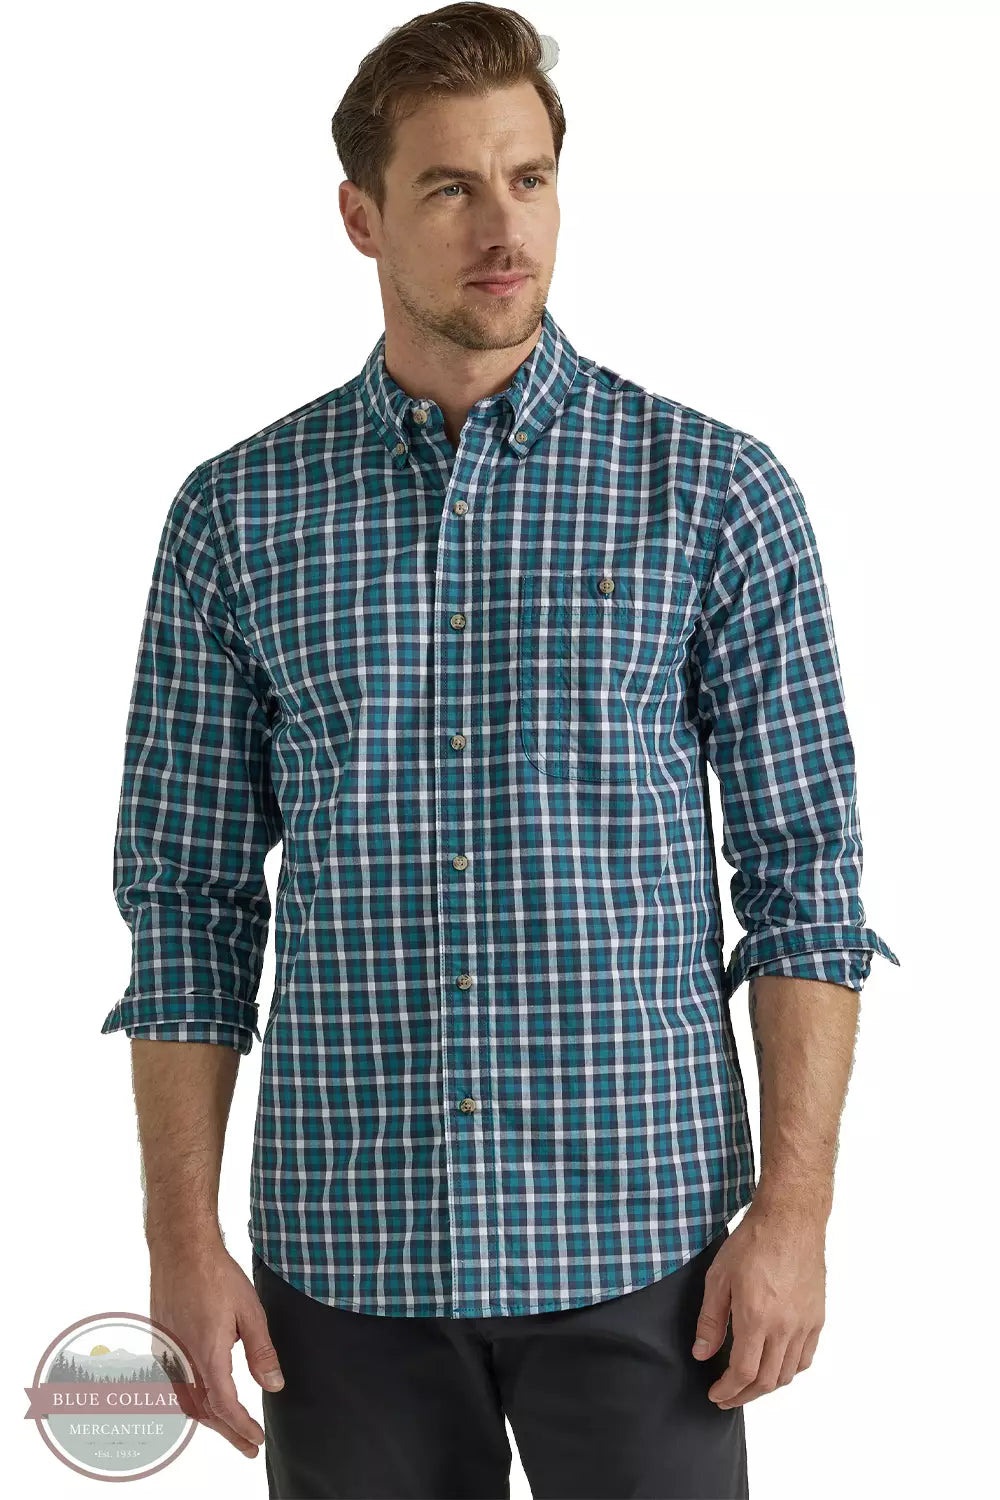 Wrangler 112330359 Rugged Wear Wrinkle Resist Button Down Shirt in Teal Navy Front View